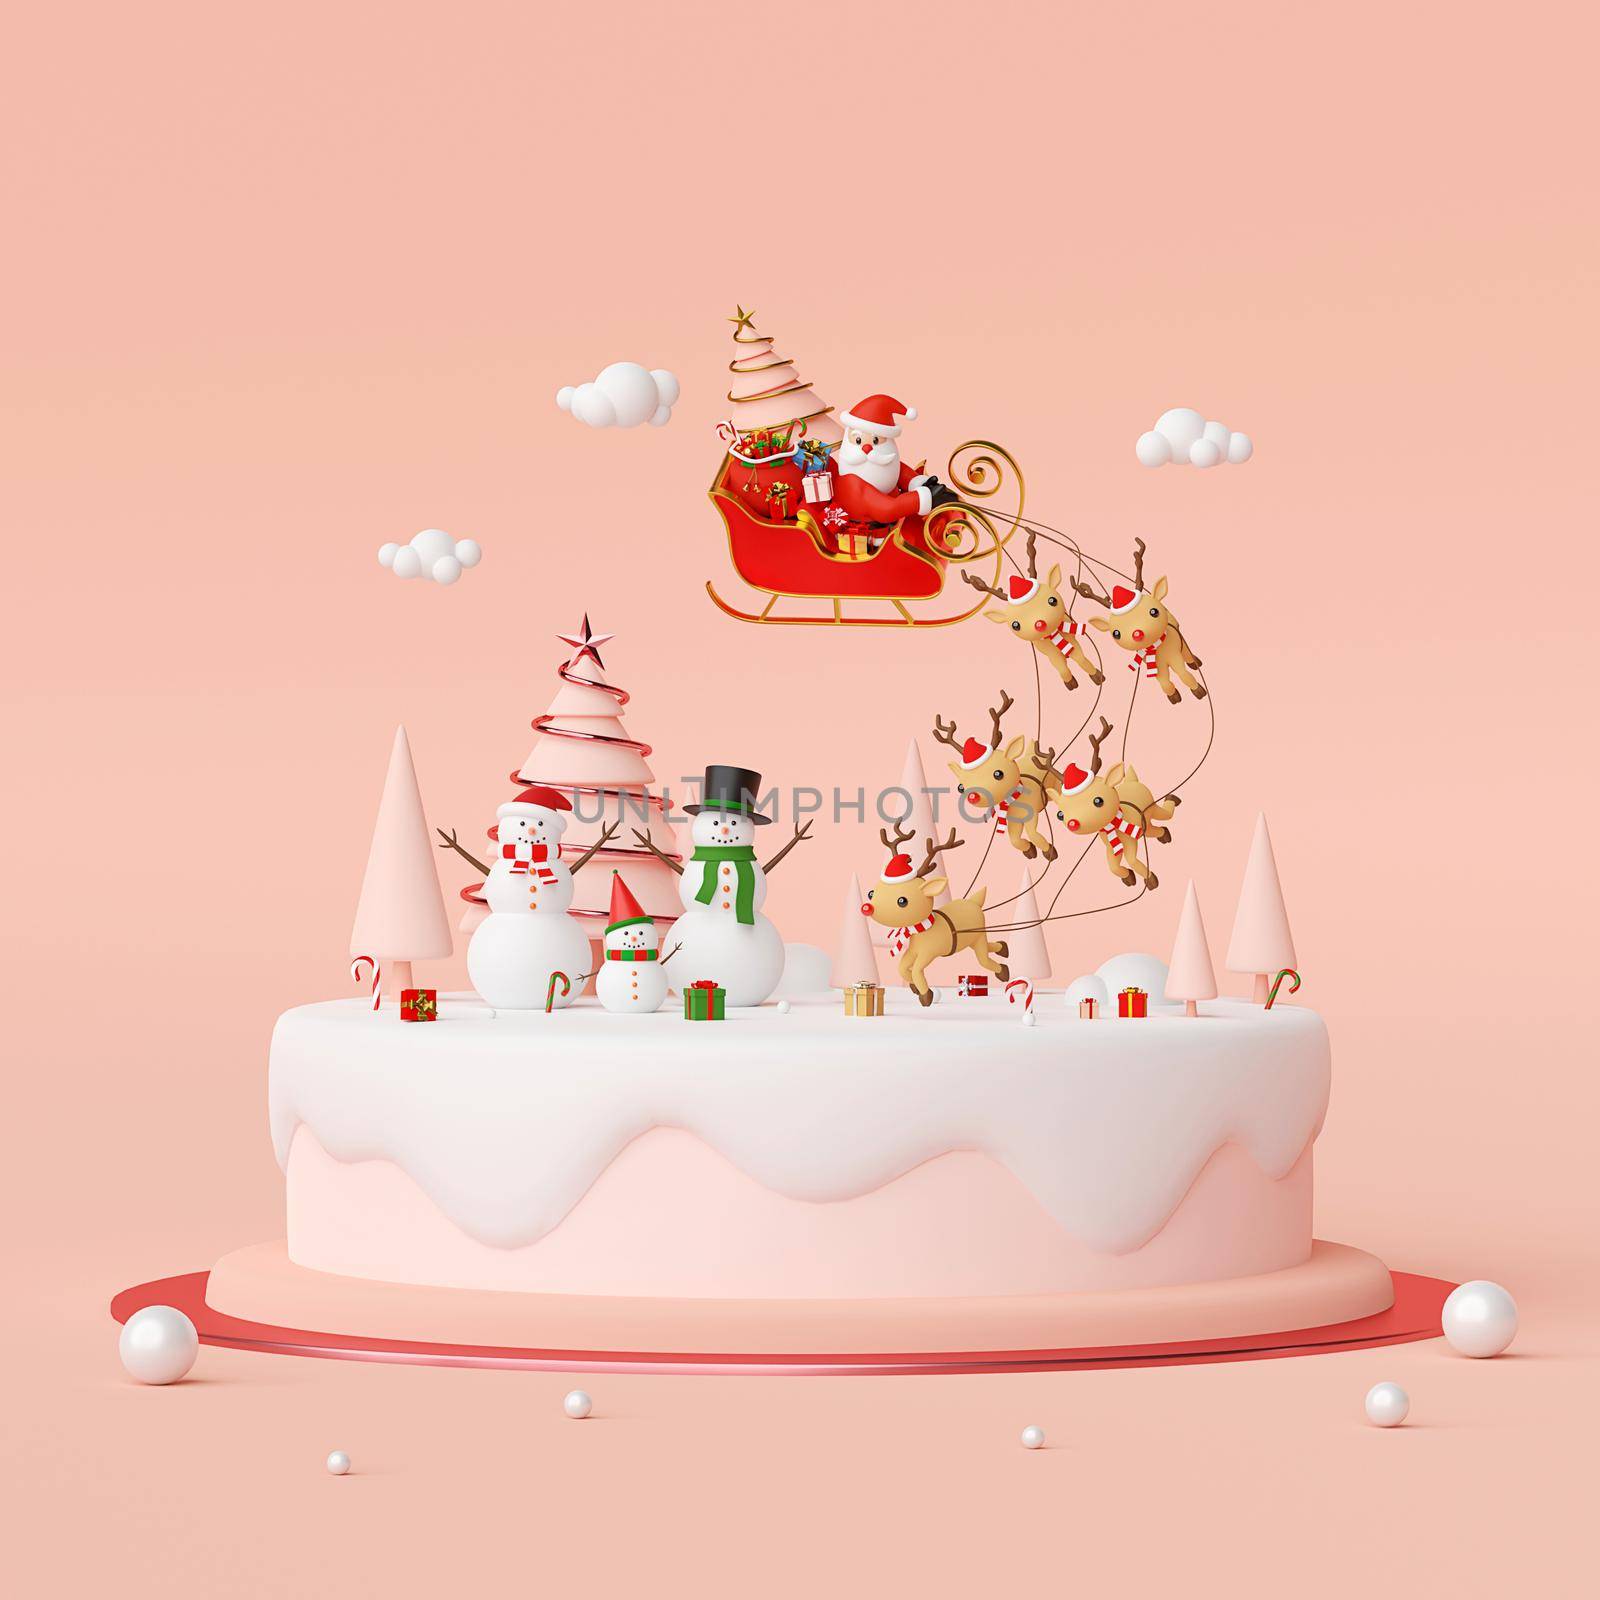 Scene of Santa Claus on a sleigh full of Christmas gifts and pulled by reindeer with snowman, 3d rendering by nutzchotwarut